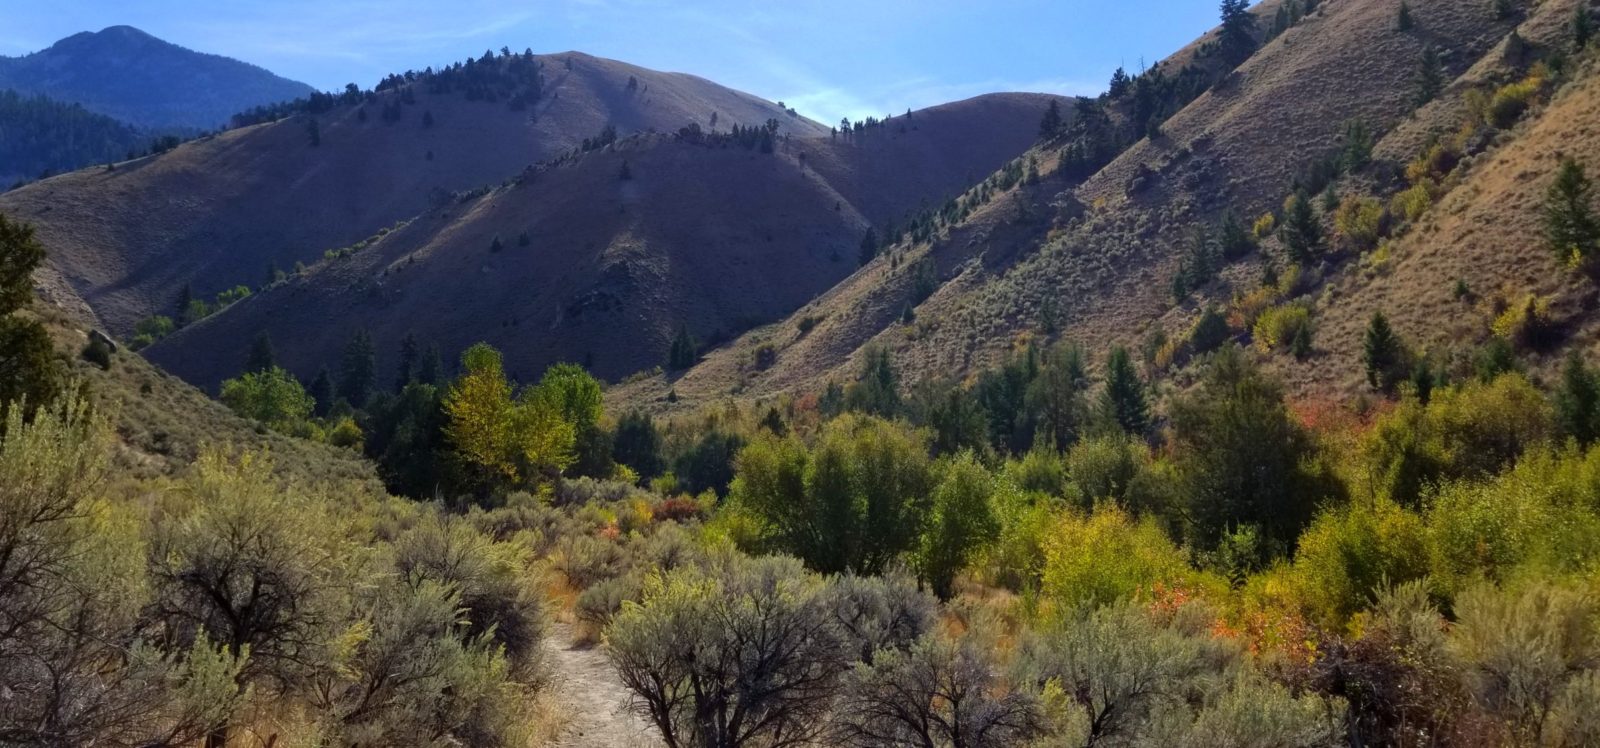 Fall colors popping up along the trail for Goldbug Hot Springs